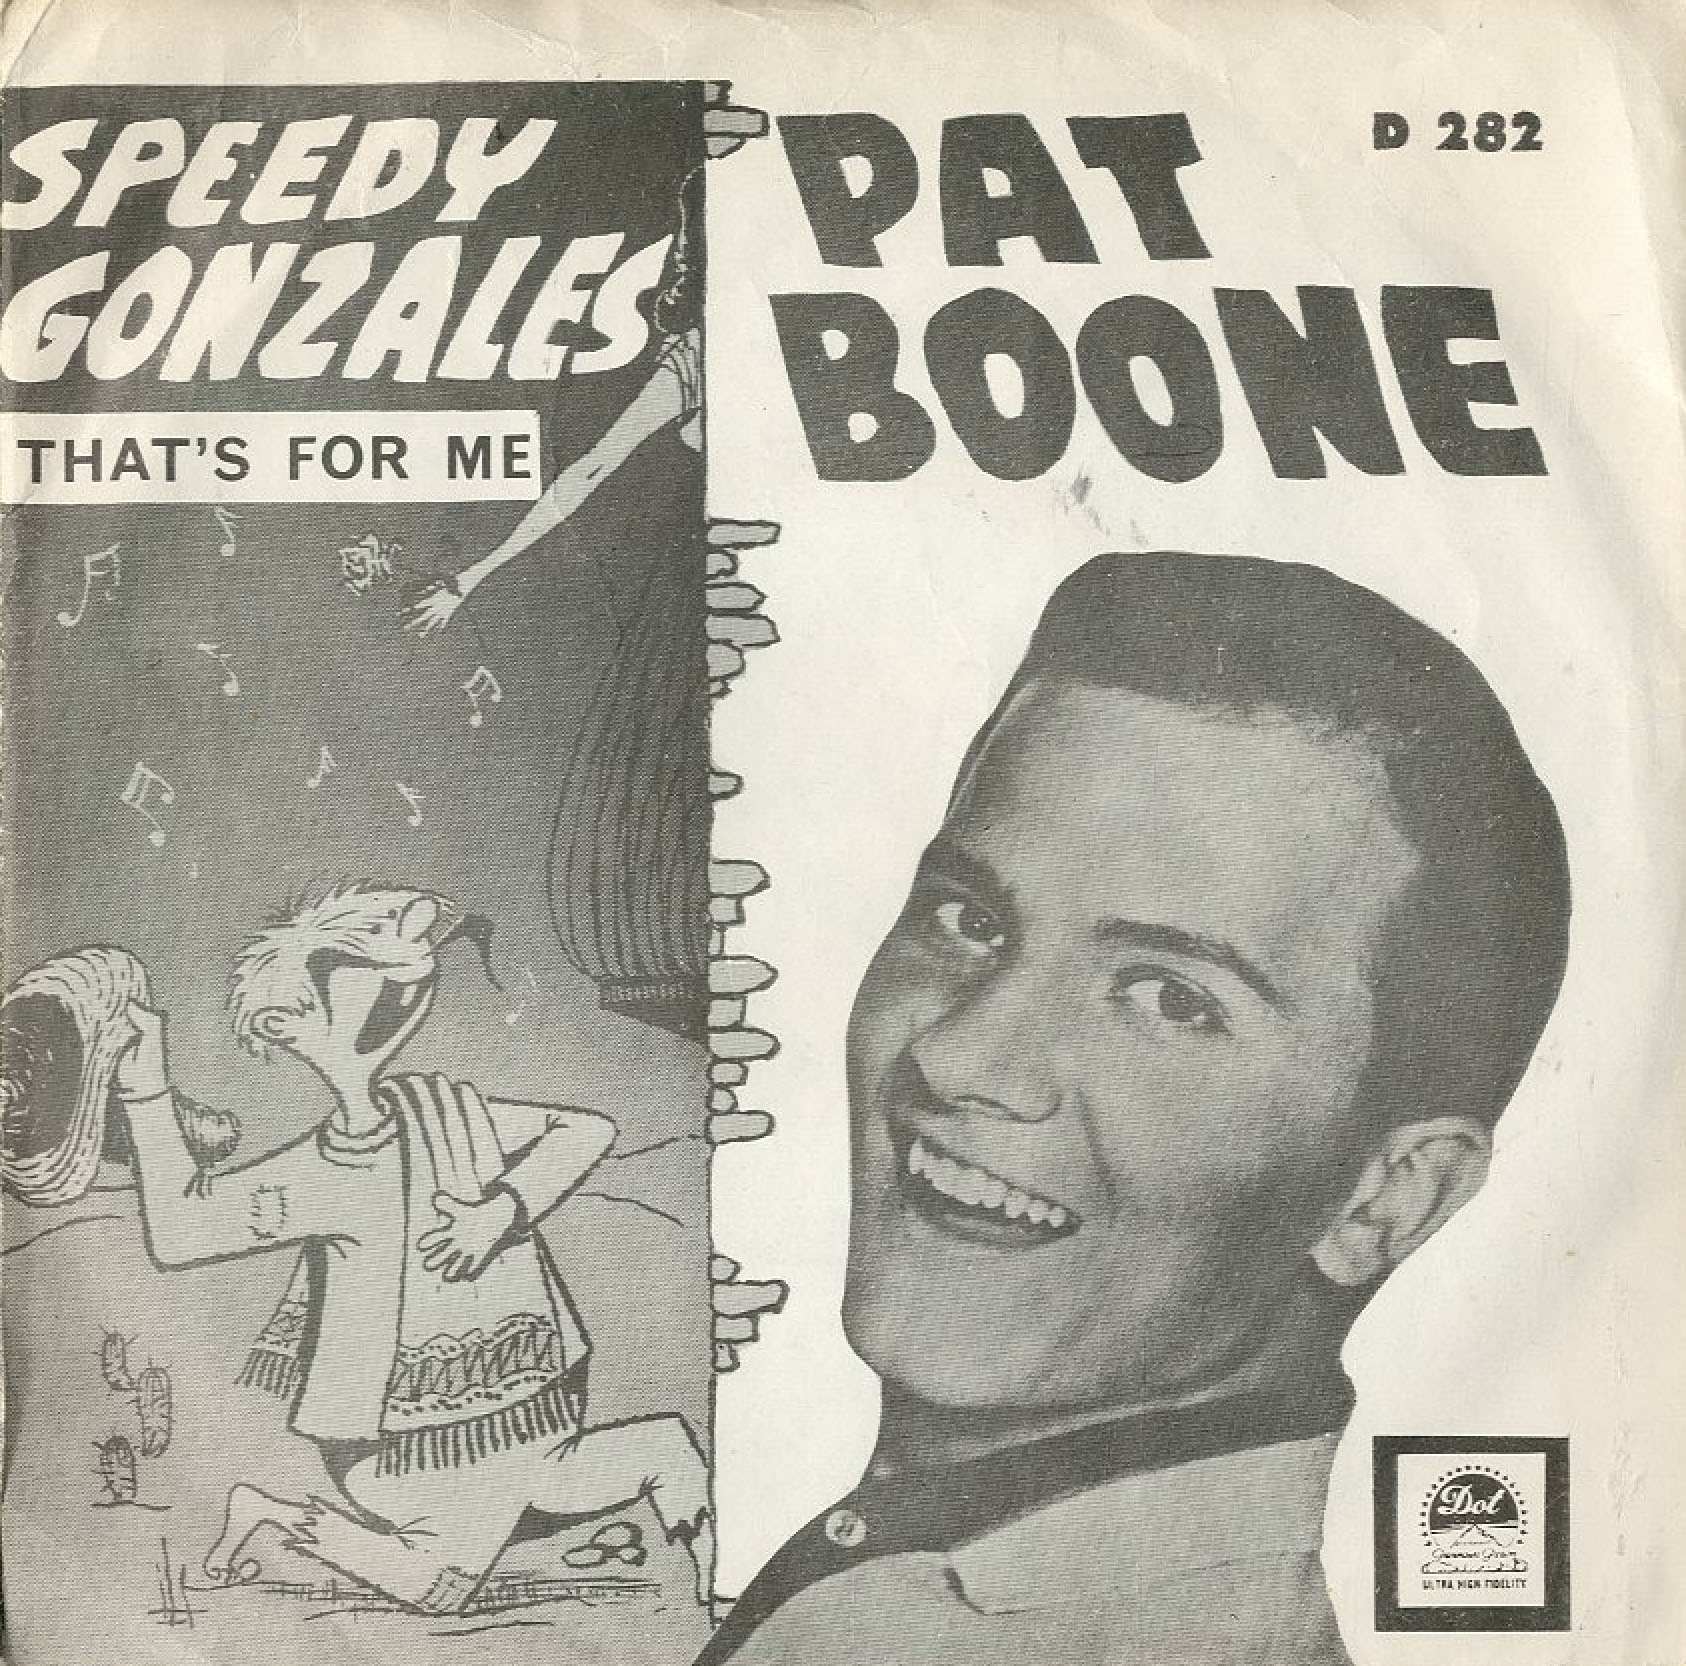 Albumcover Pat Boone - Mardigras(Karneval - From the Jerry Wald Production MARDI GRAS presented by 20th Century Fox